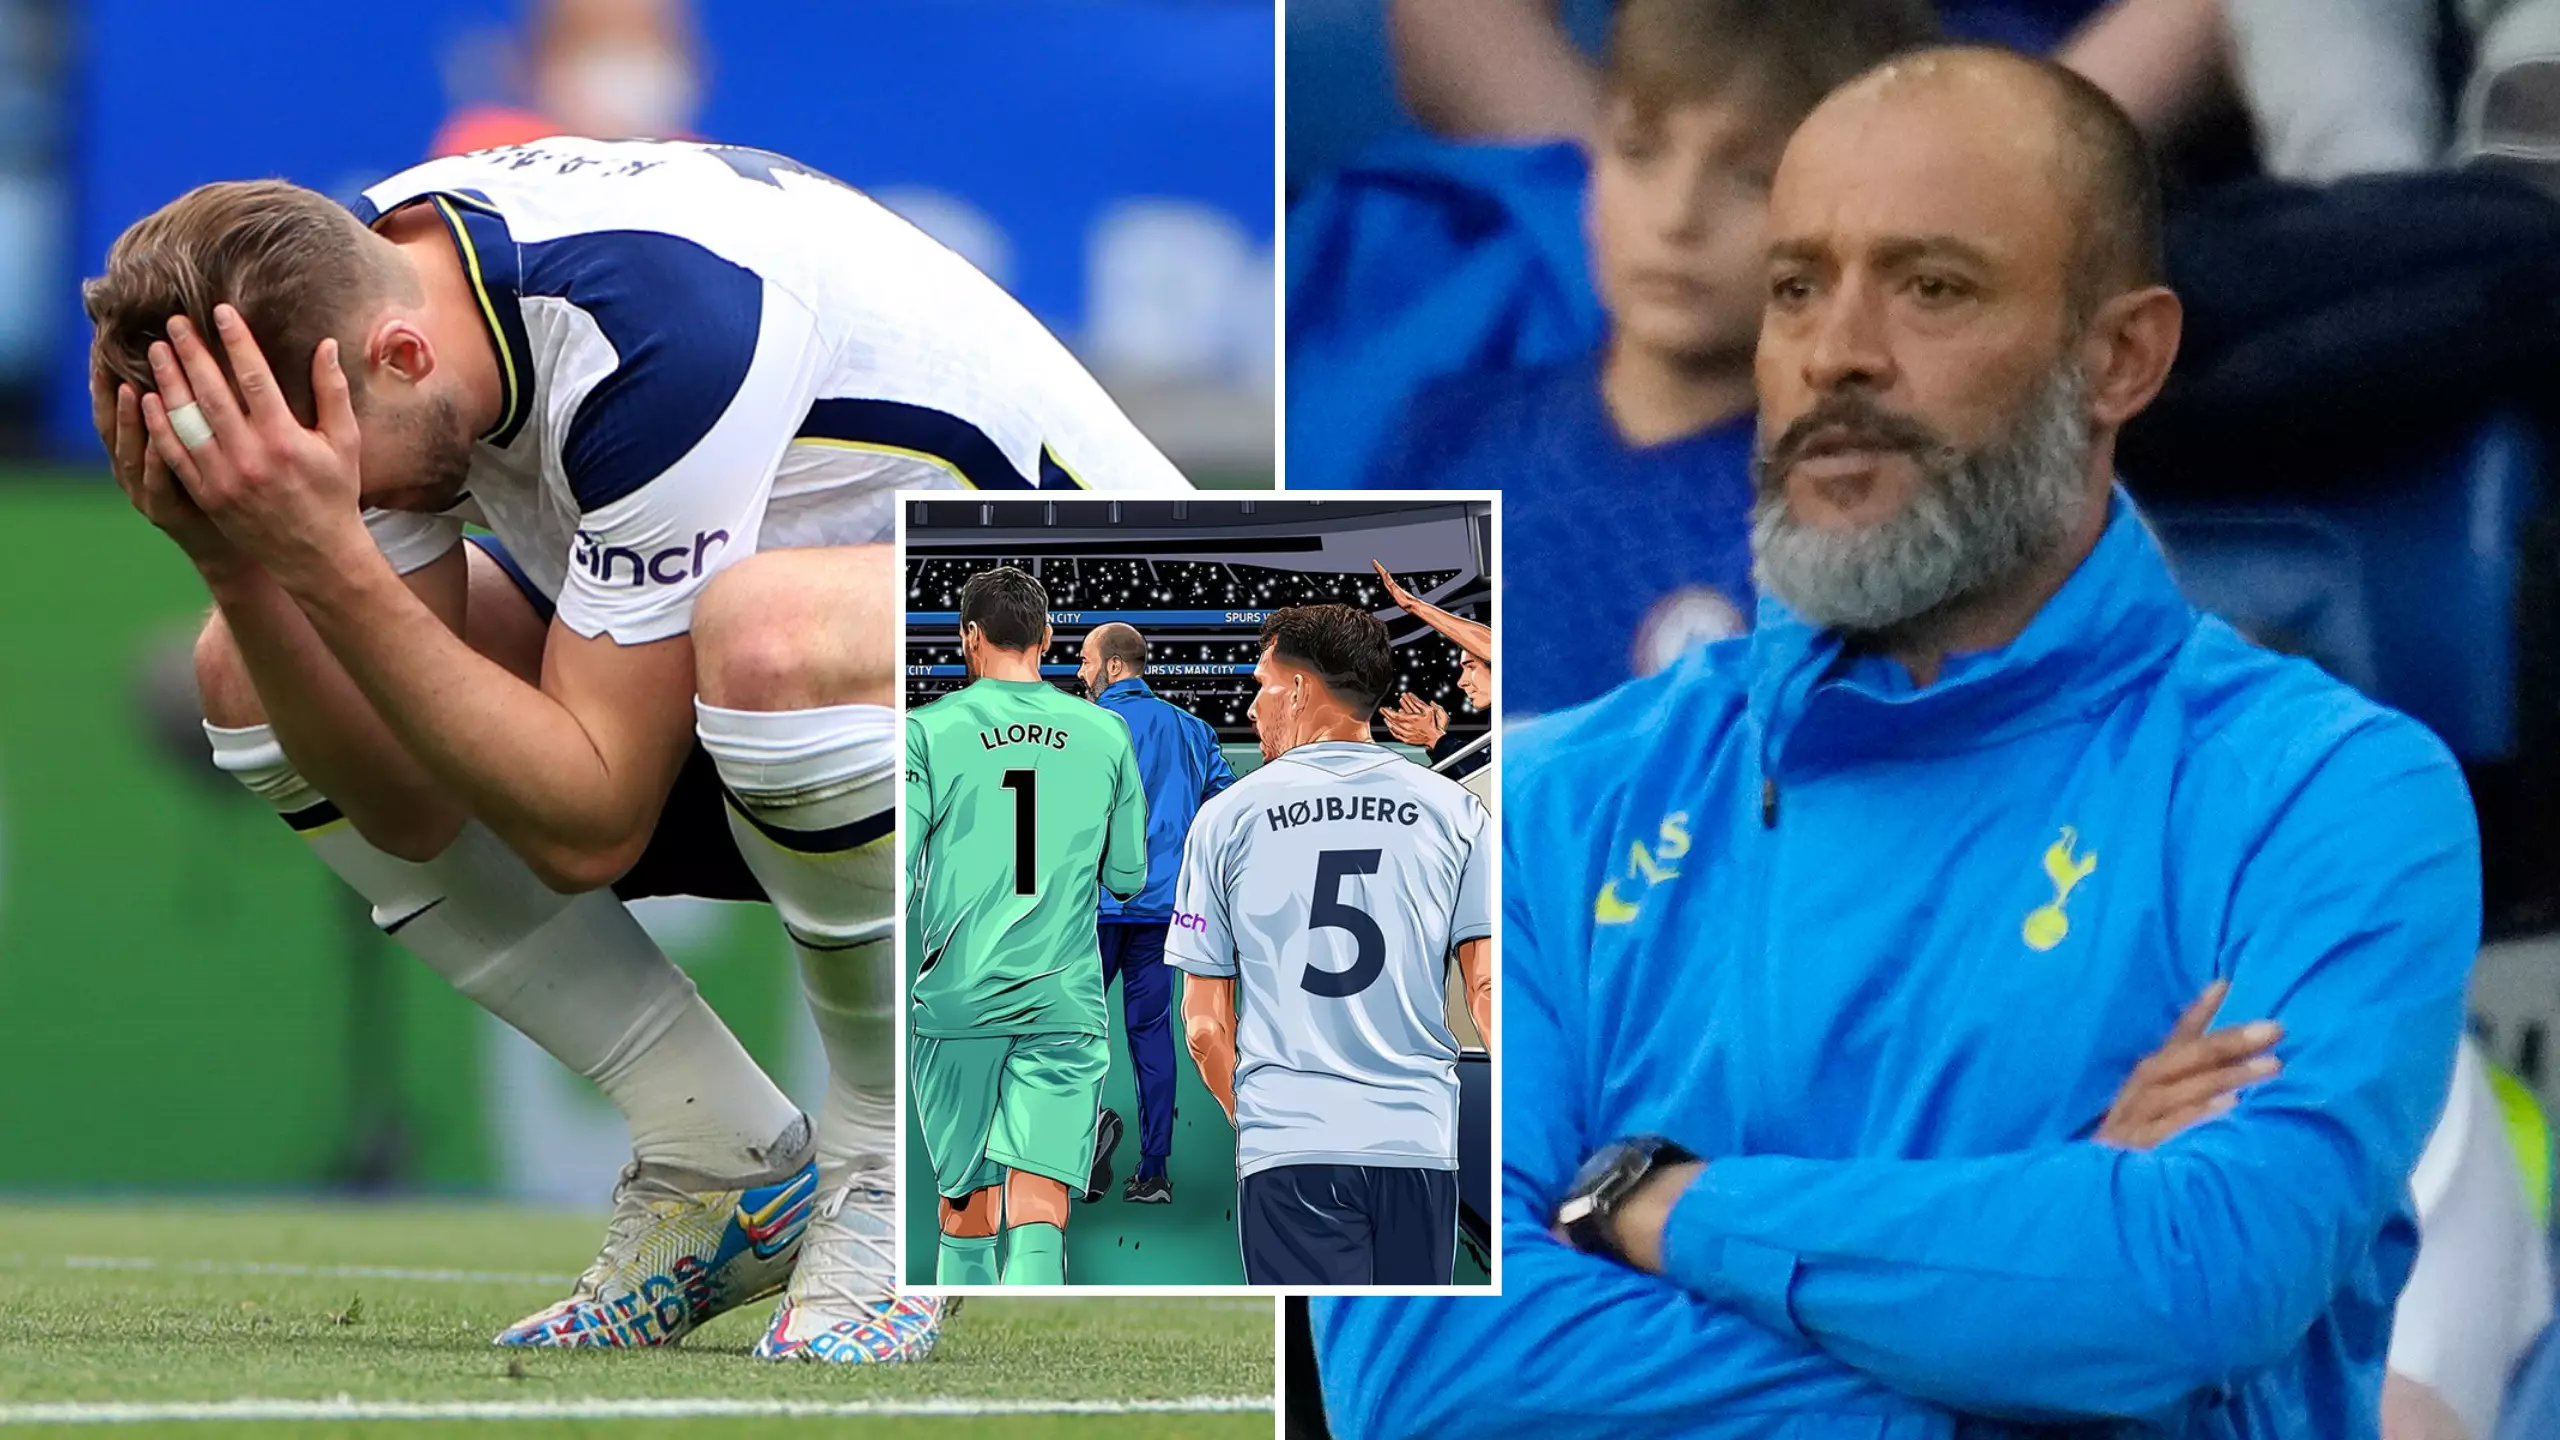 Spurs Upset Their Fans In A Major Way With 'Embarrassing' Tweet About Man City Game